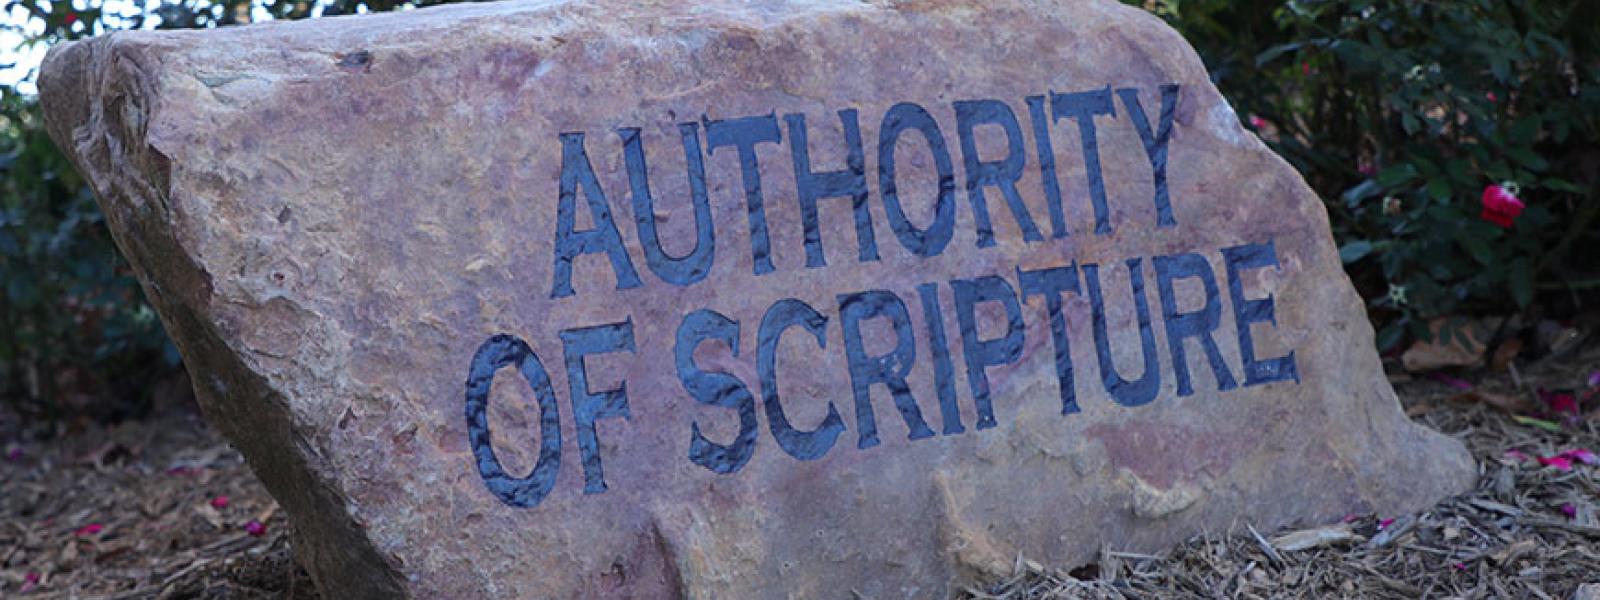 The core value of the Authority of Scripture is the basis for CIU's other core values.